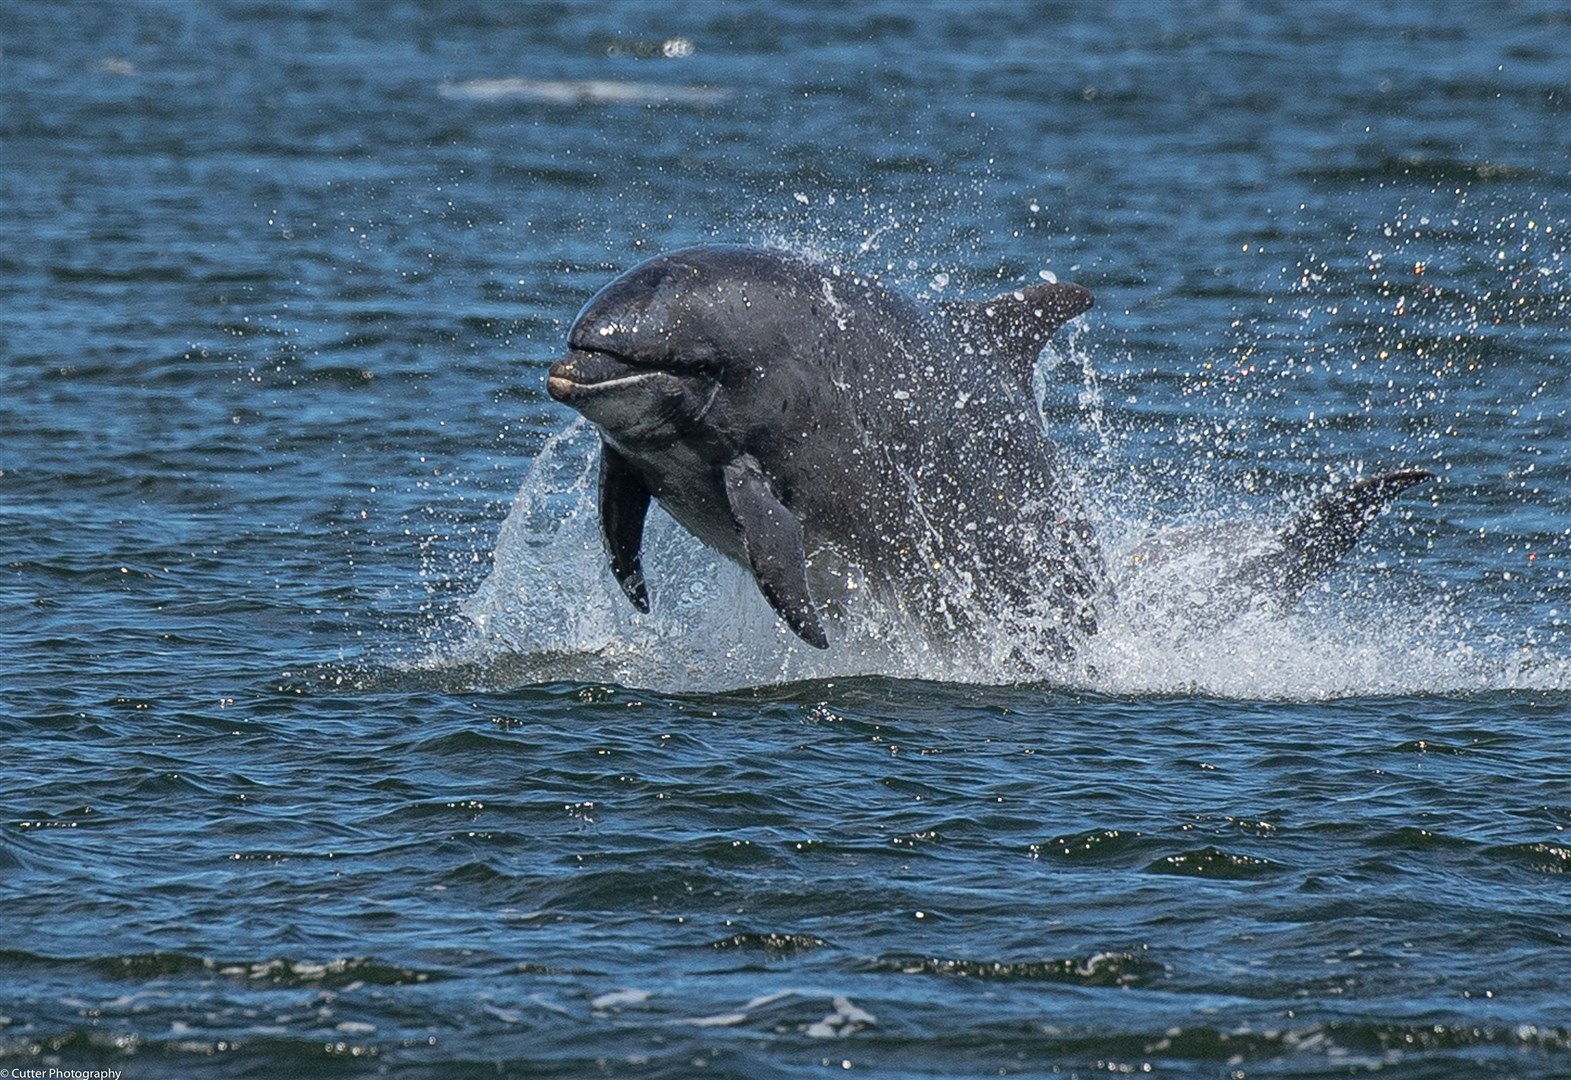 Scotland's first dolphin and porpoise conservation strategy has been launched